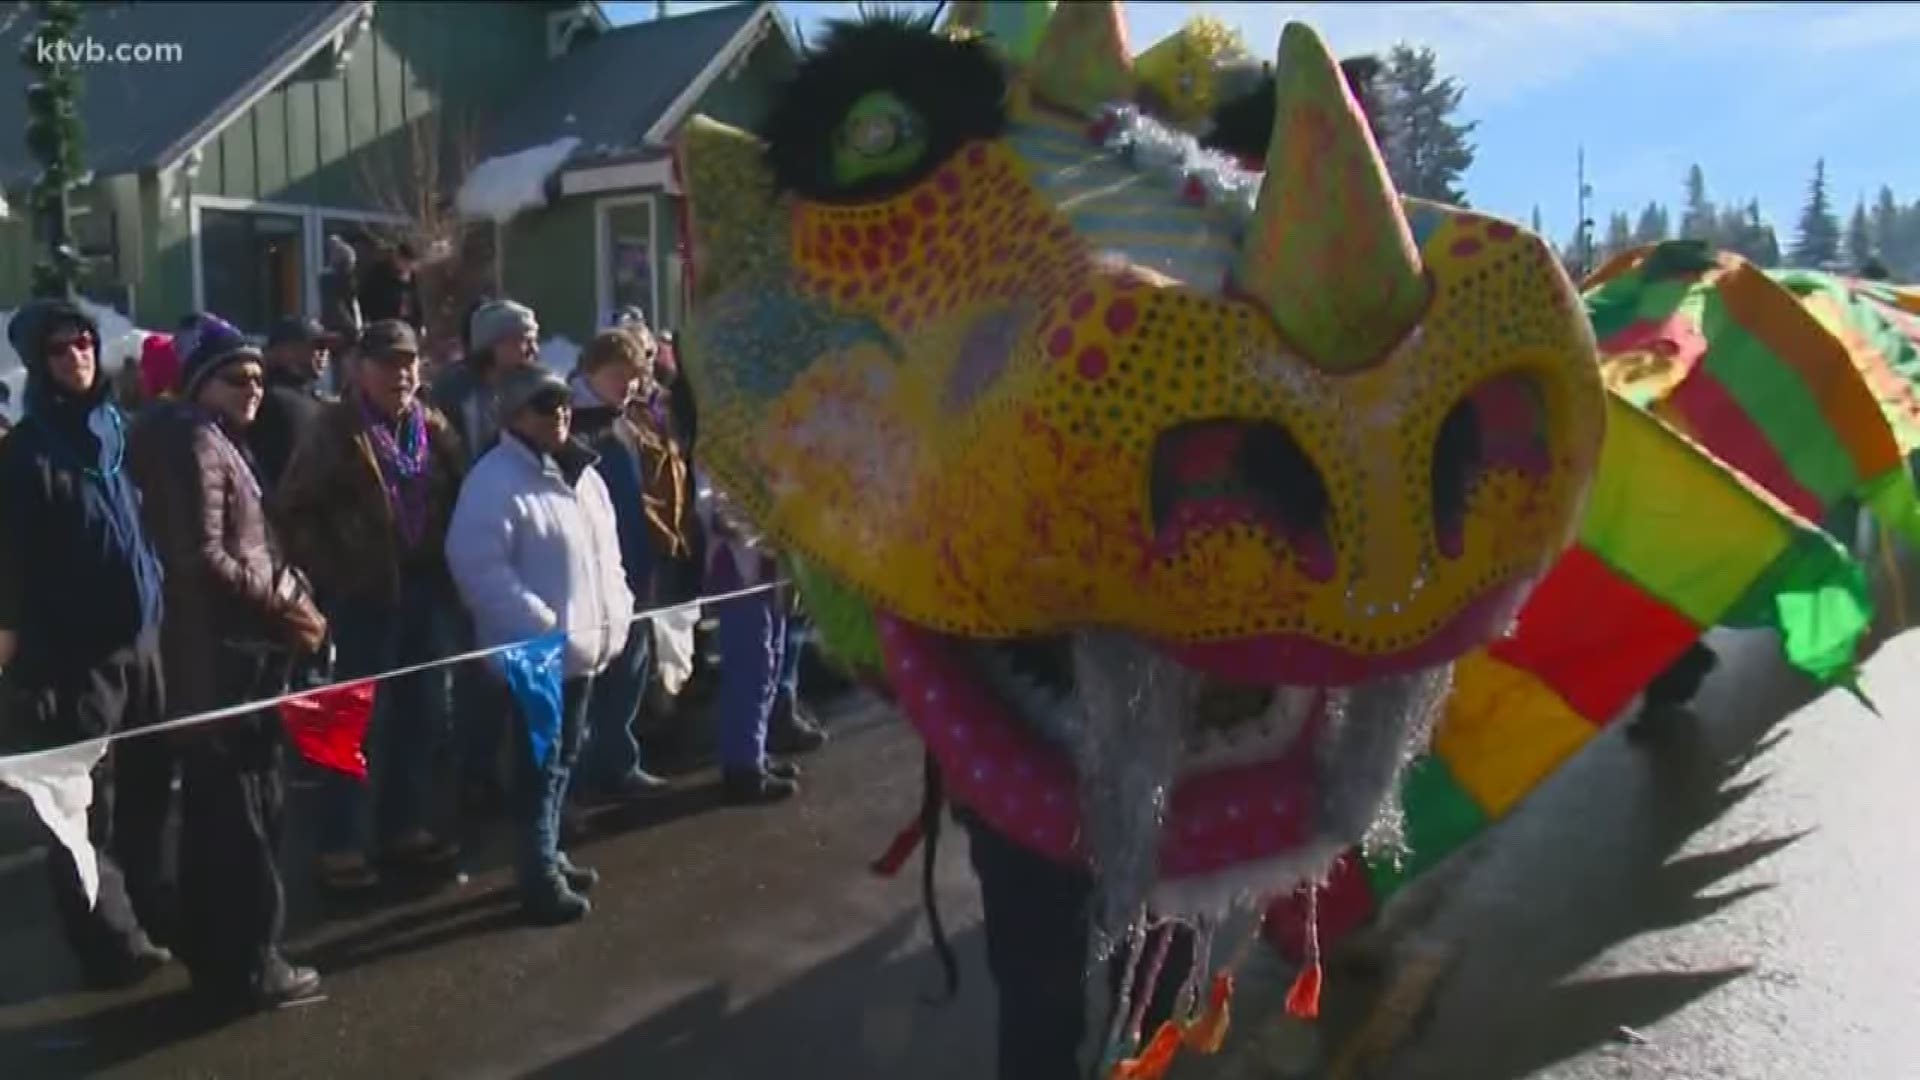 The 2019 McCall Winter Carnival is still going on until Feb. 5, but the Mardi Gras Parade kicked off the weeklong event.